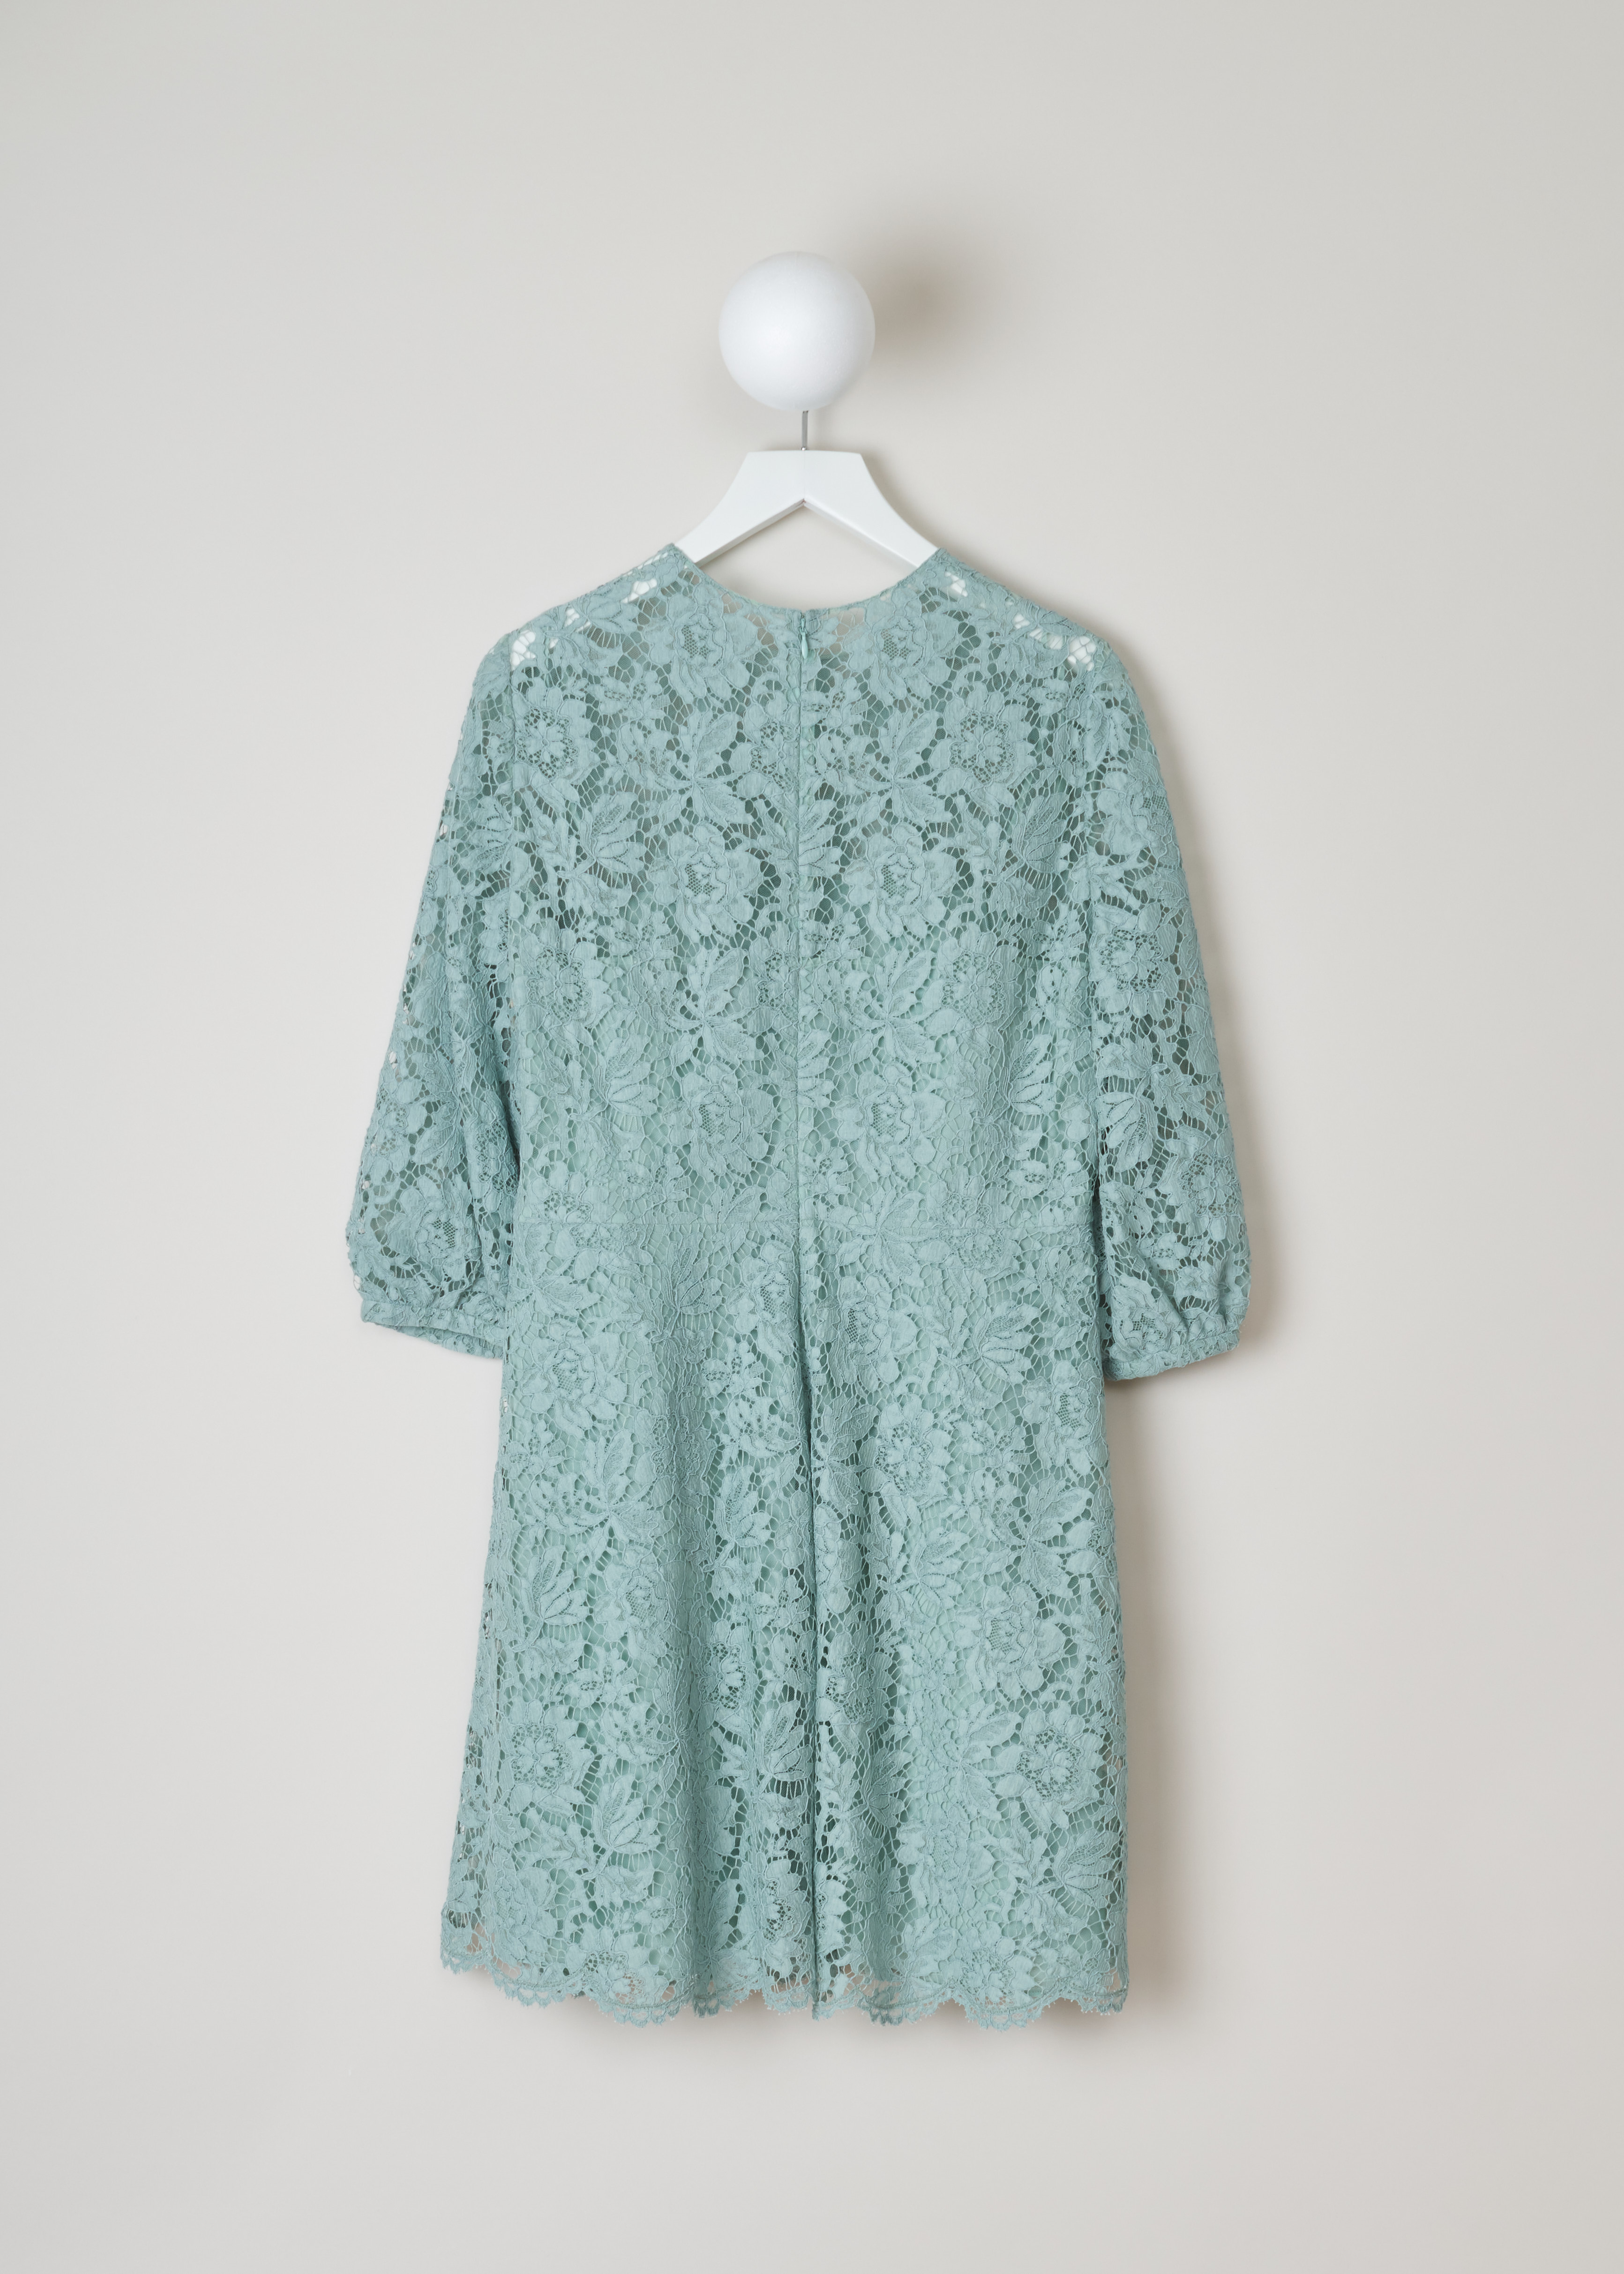 Valentino pastel green long sleeve lace dress RB0VALH71EC_5W0 light blue back. Pastel green dress in cotton lace, bishop sleeves, a fitted bodice with a close-fit neckline, an A-line skirt, scalloped hems and an invisible zip fastening on the back.